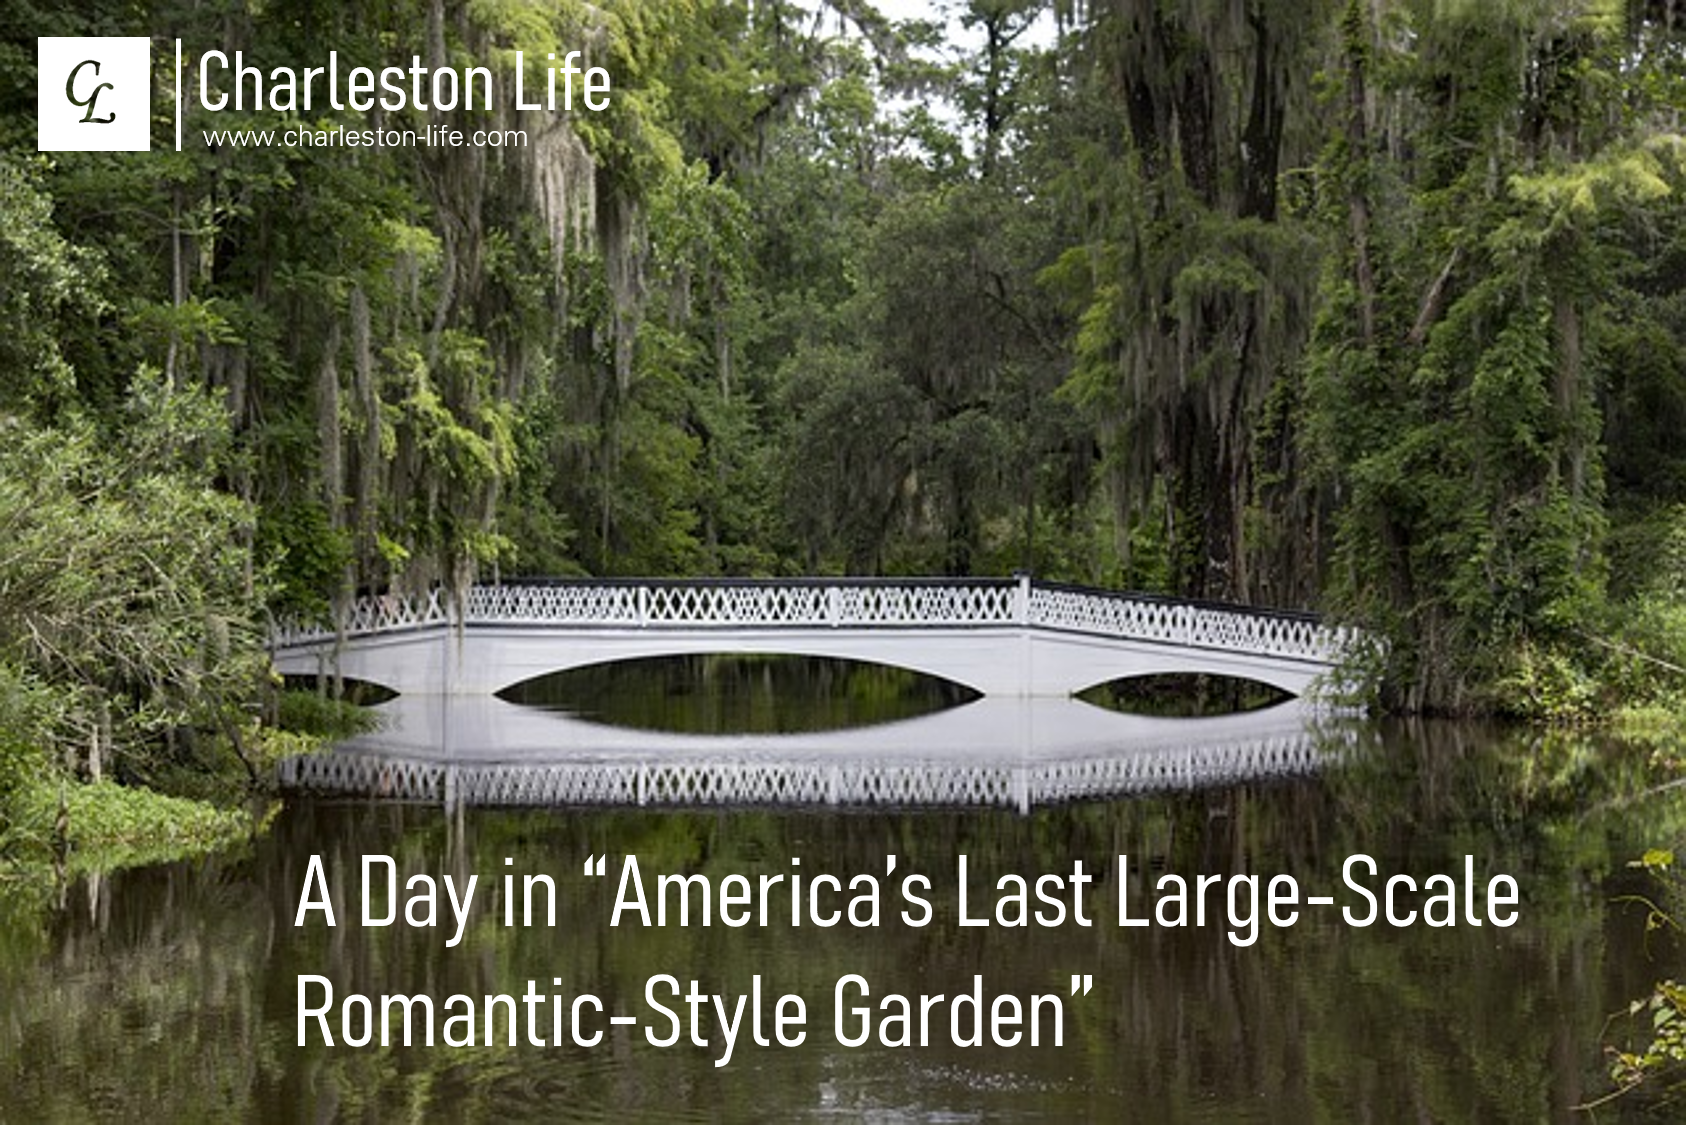 Visiting Magnolia Plantation: A Day in "America's Last Large-Scale Romantic-Style Garden"